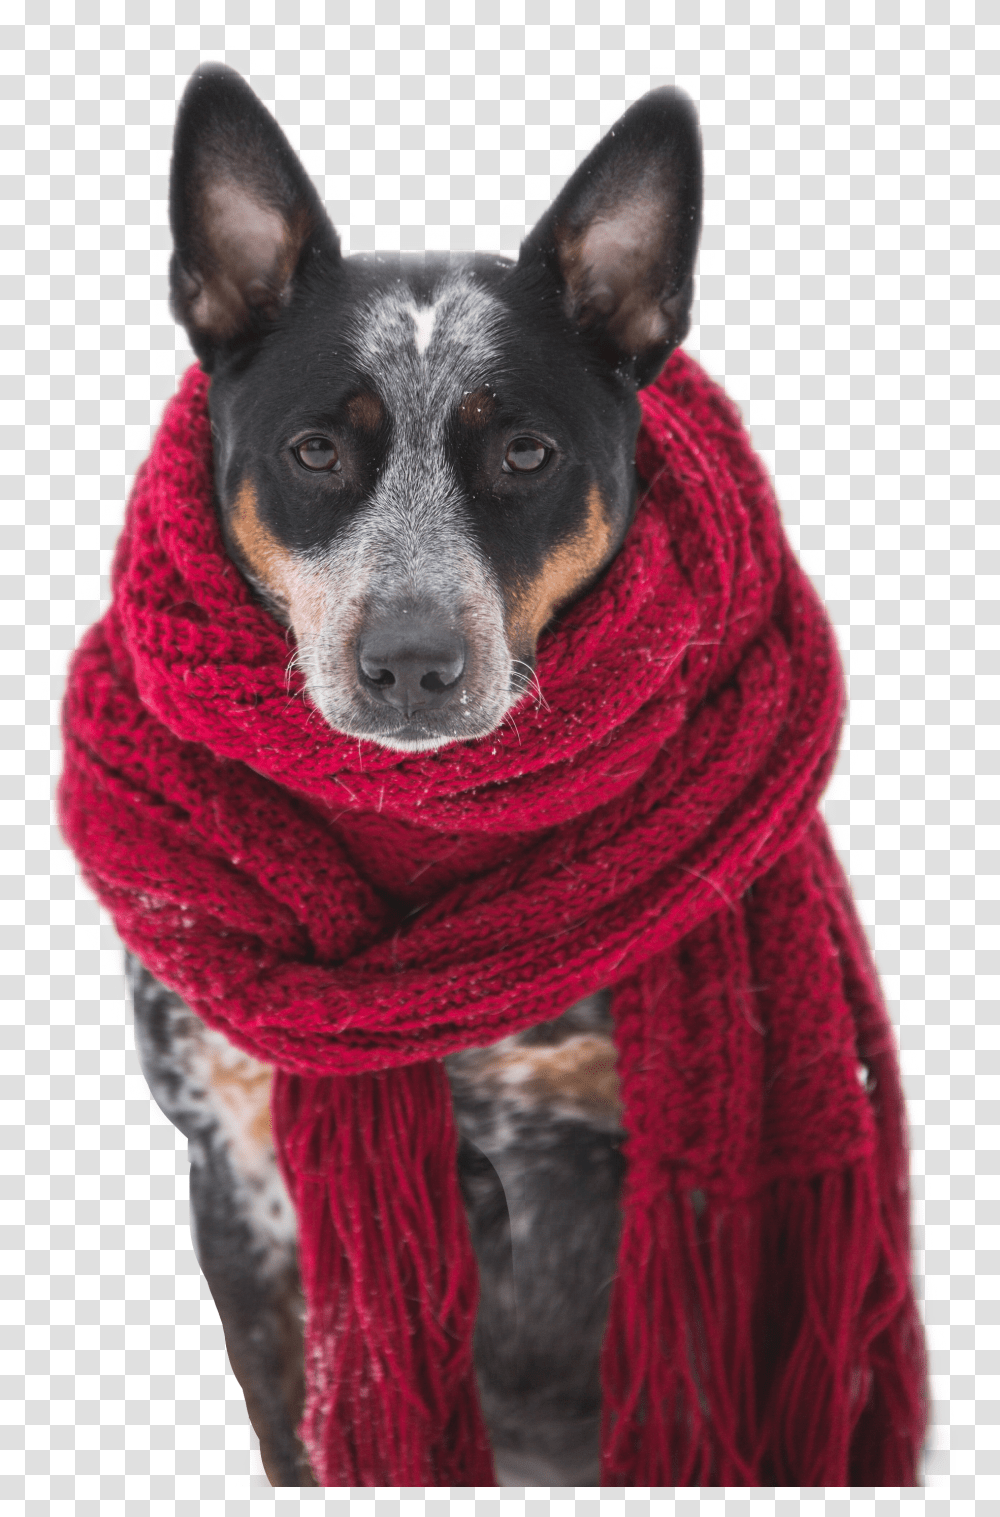 Dog Scarf Red Pet Pets Animals Dogs Wearing Scarves In The Snow Transparent Png